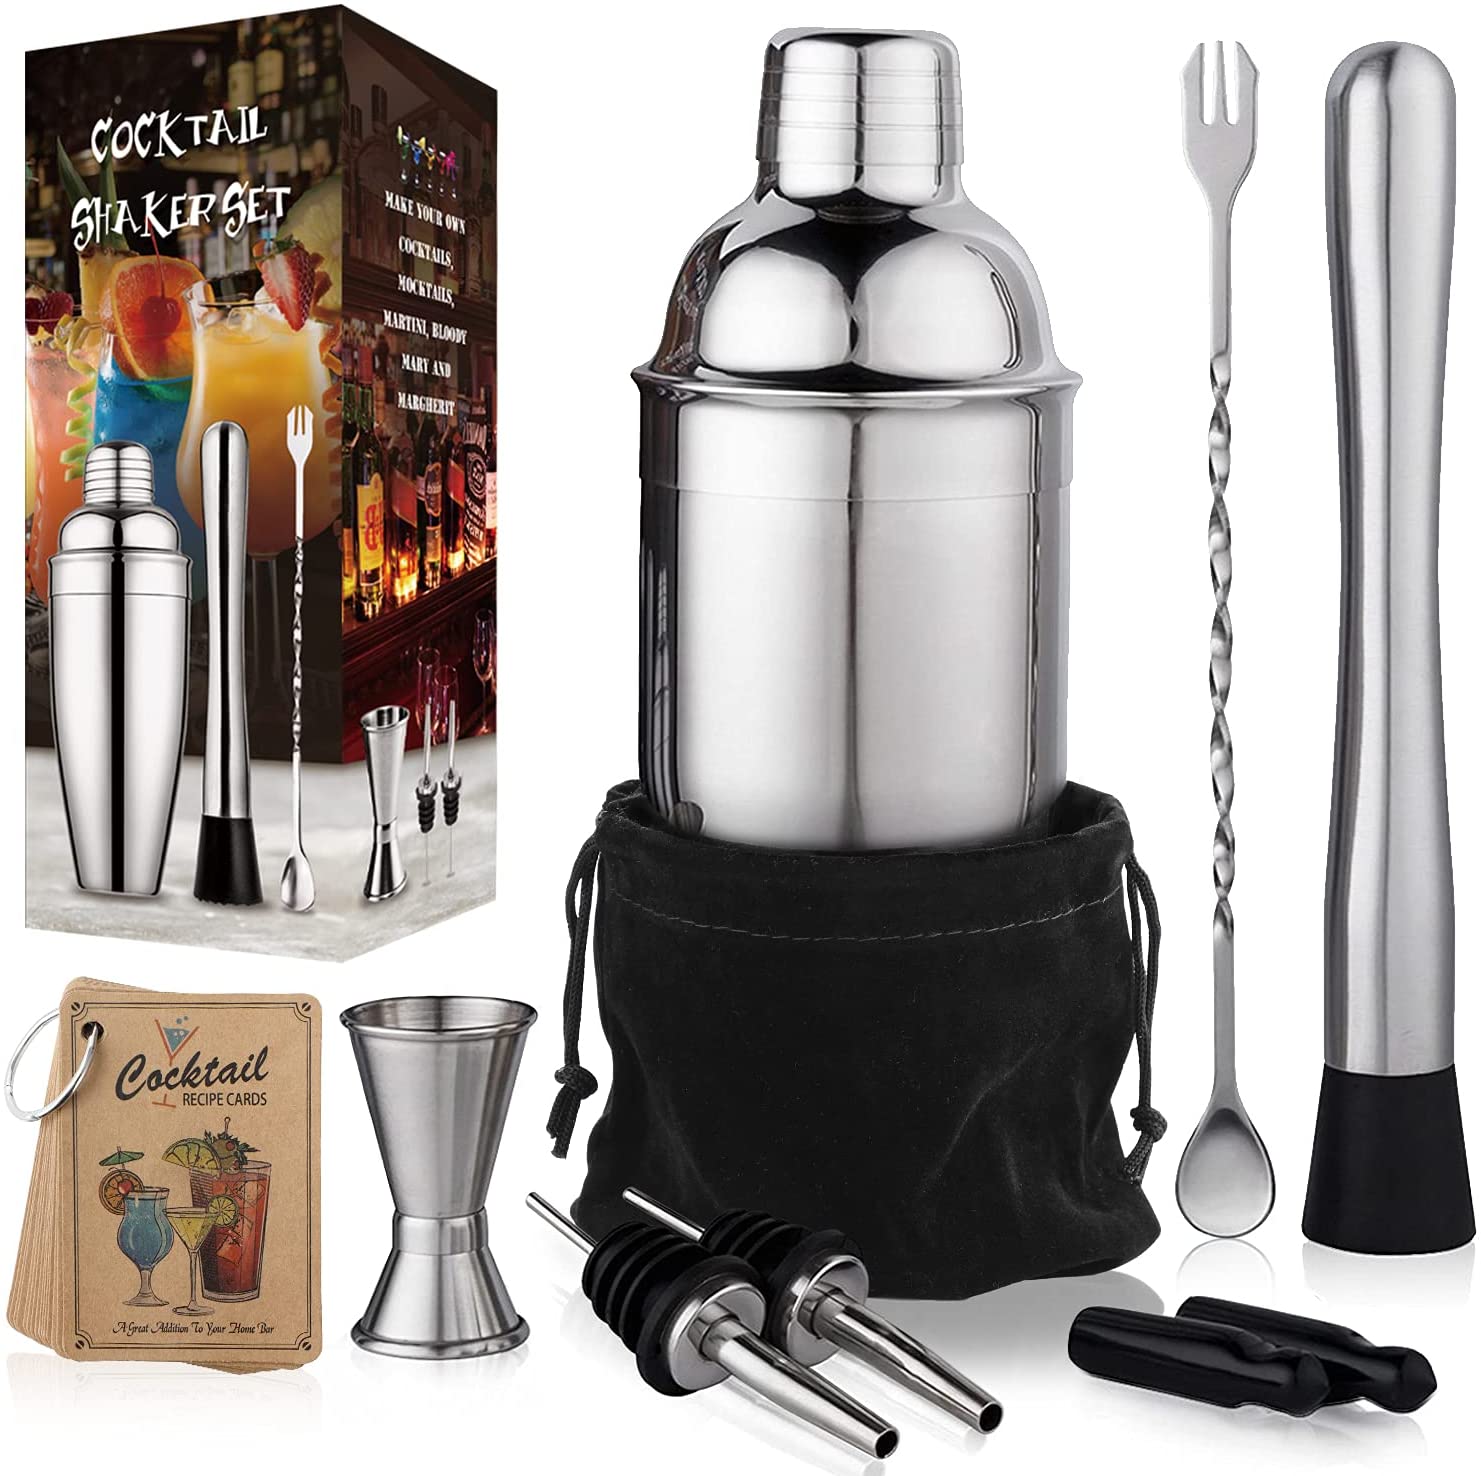 24 oz Cocktail Set Bartender Kit by Aozita, Stainless Steel Martini Shaker, Mixing Spoon, Muddler, Measuring Jigger, Liquor Pourers with Dust Caps and Manual of Recipes, Professional Bar Tools – King